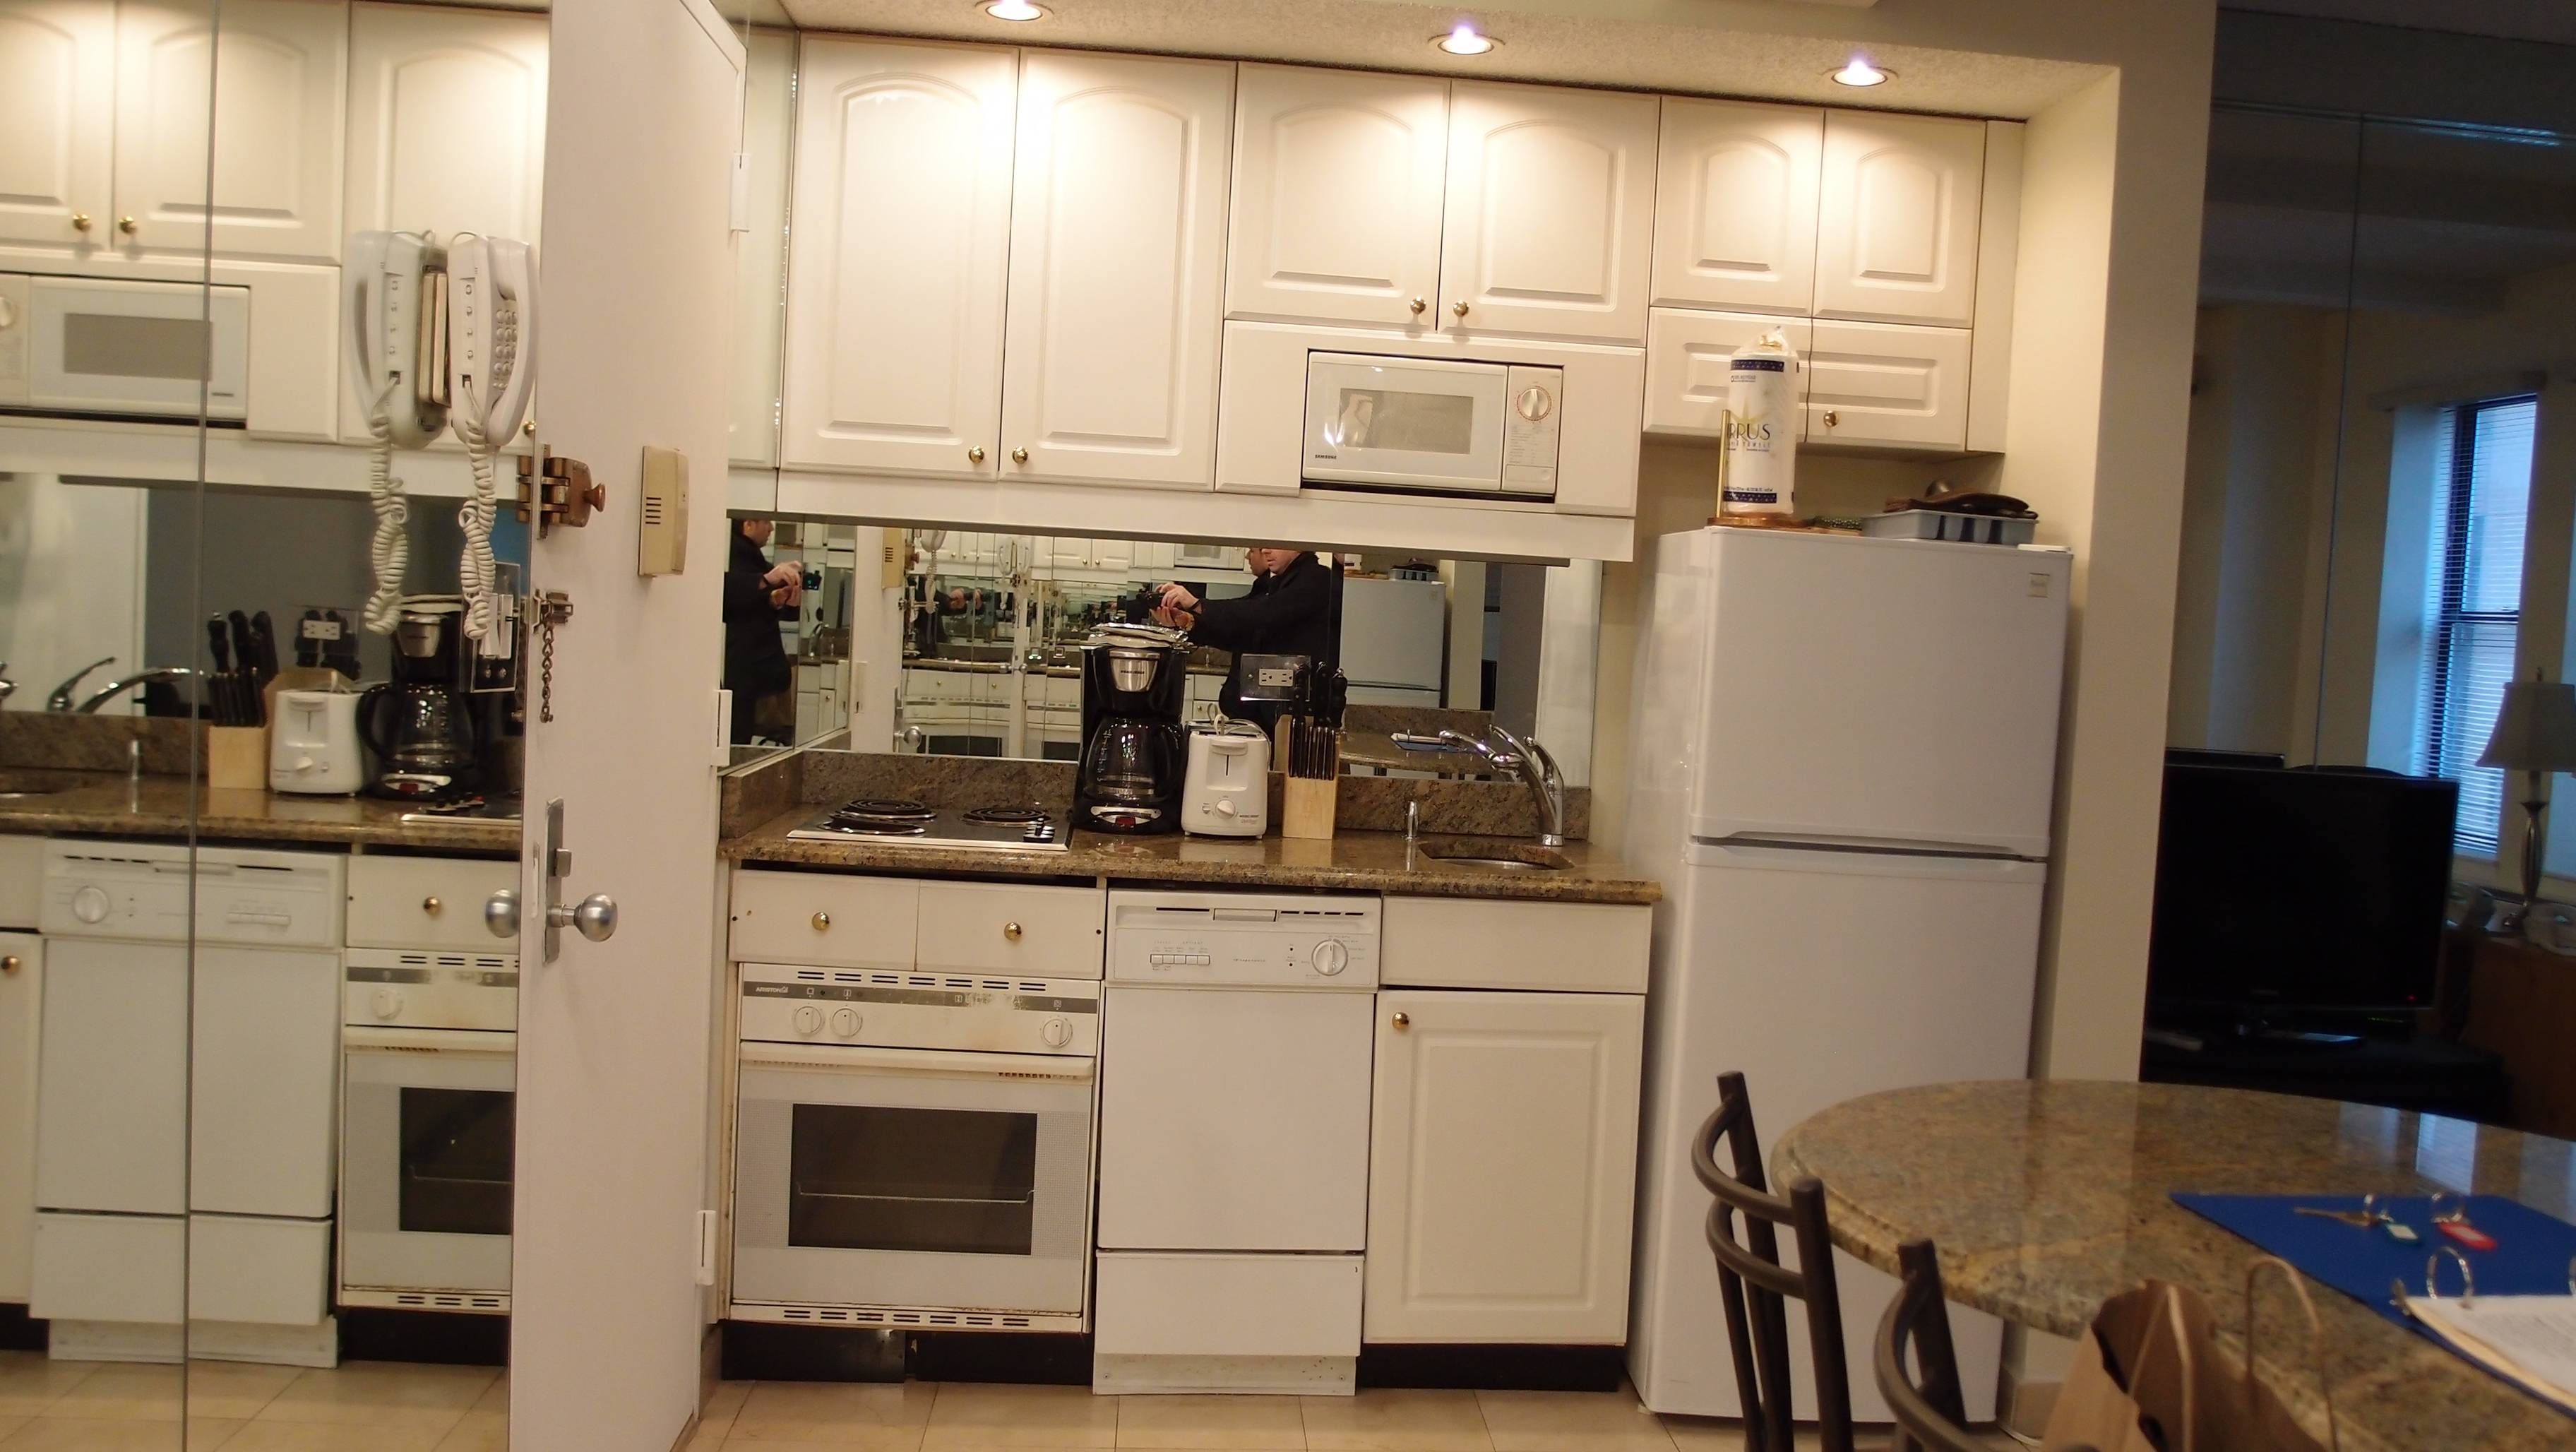 NEW TO MARKET - FURNISHED SHORT TERM OR LONG TERM RENTAL - BEAUTIFUL 1 BEDROOM, 1 BATH IN MIDTOWN WEST!